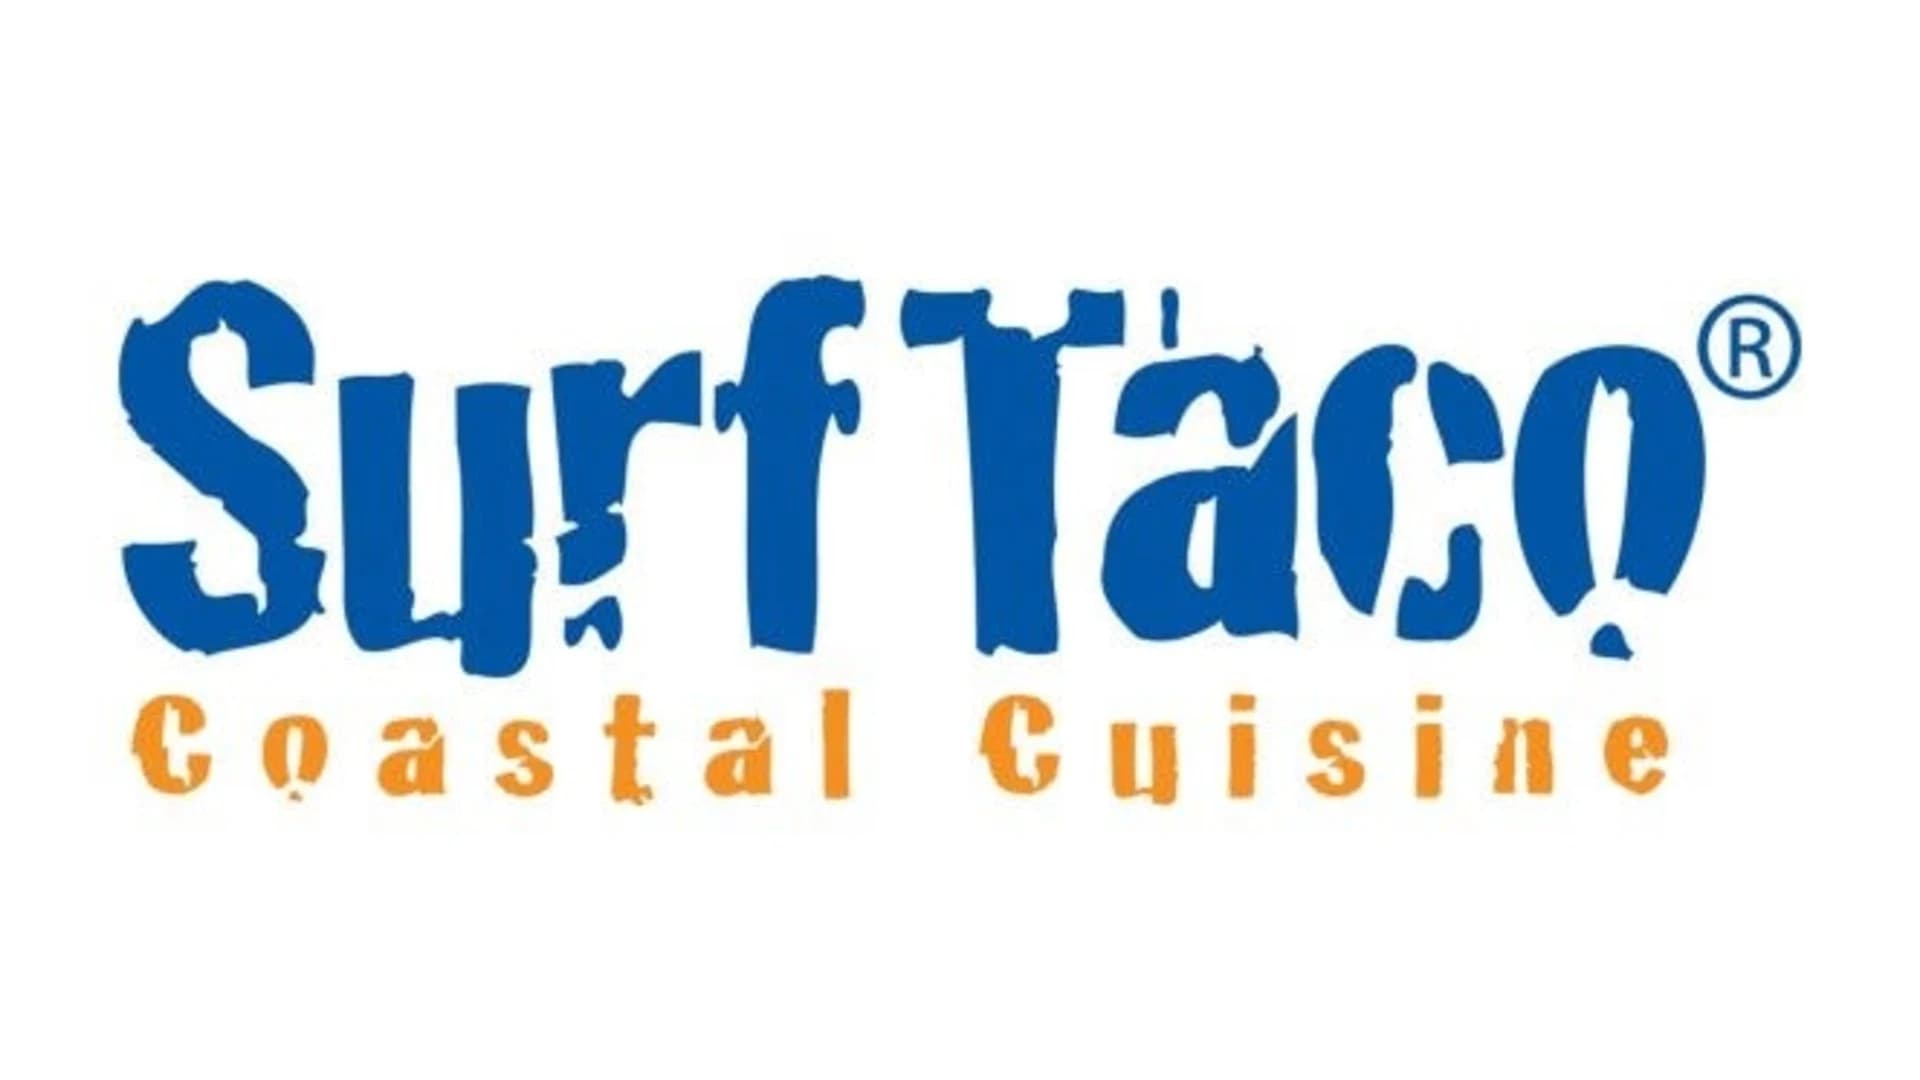 Published report: Surf taco to open new location in New Jersey